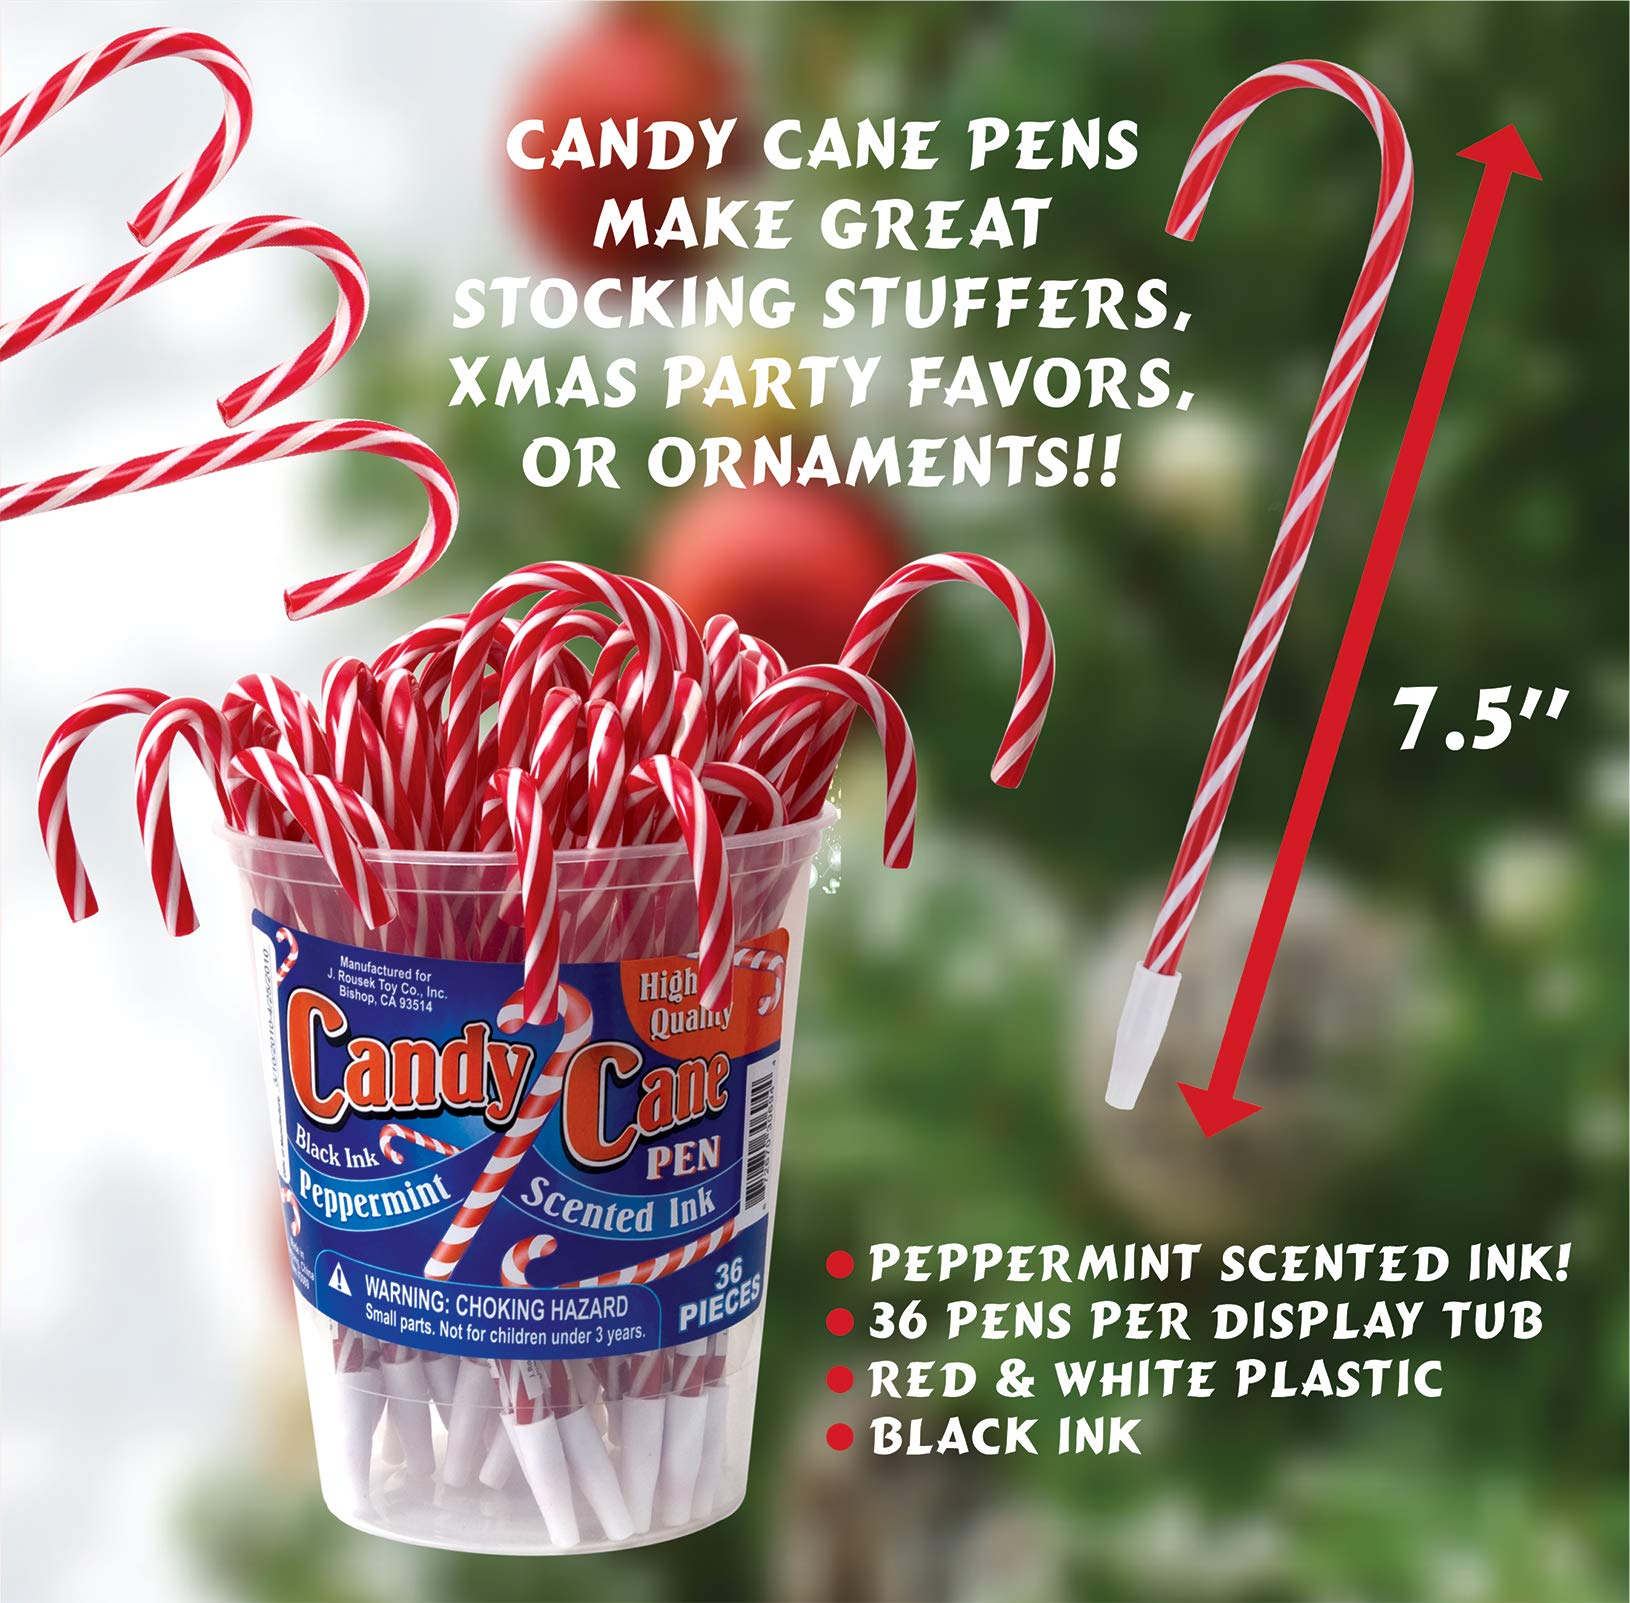 Candy Cane Pen with Peppermint Scented Ink - Tub of 36 Pens